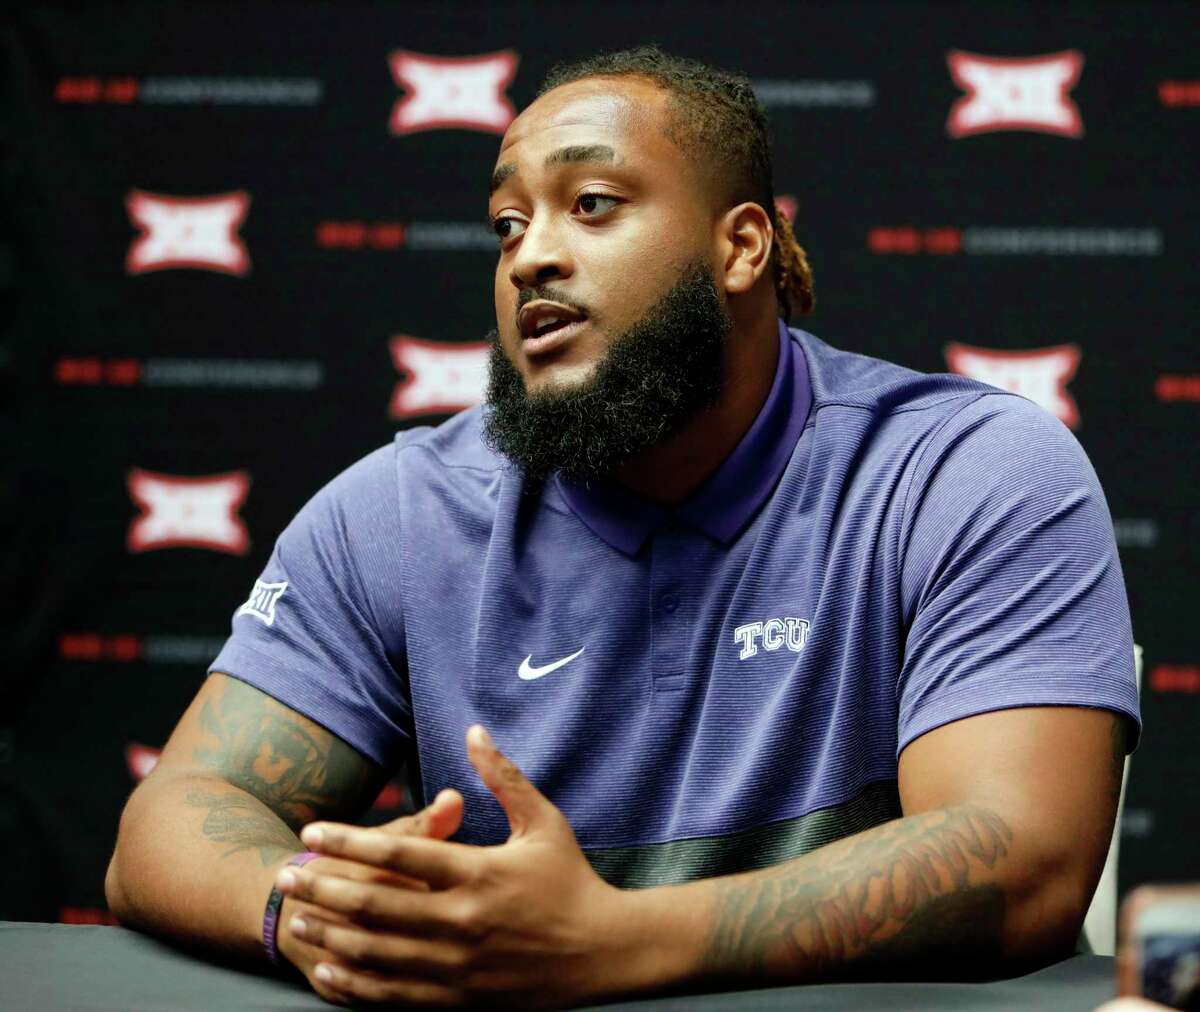 TCU offensive tackle Lucas Niang speaks to the media on the first day of Big 12 NCAA college football media days Monday, July 15, 2019, at AT&T Stadium in Arlington, Texas. (AP Photo/David Kent)